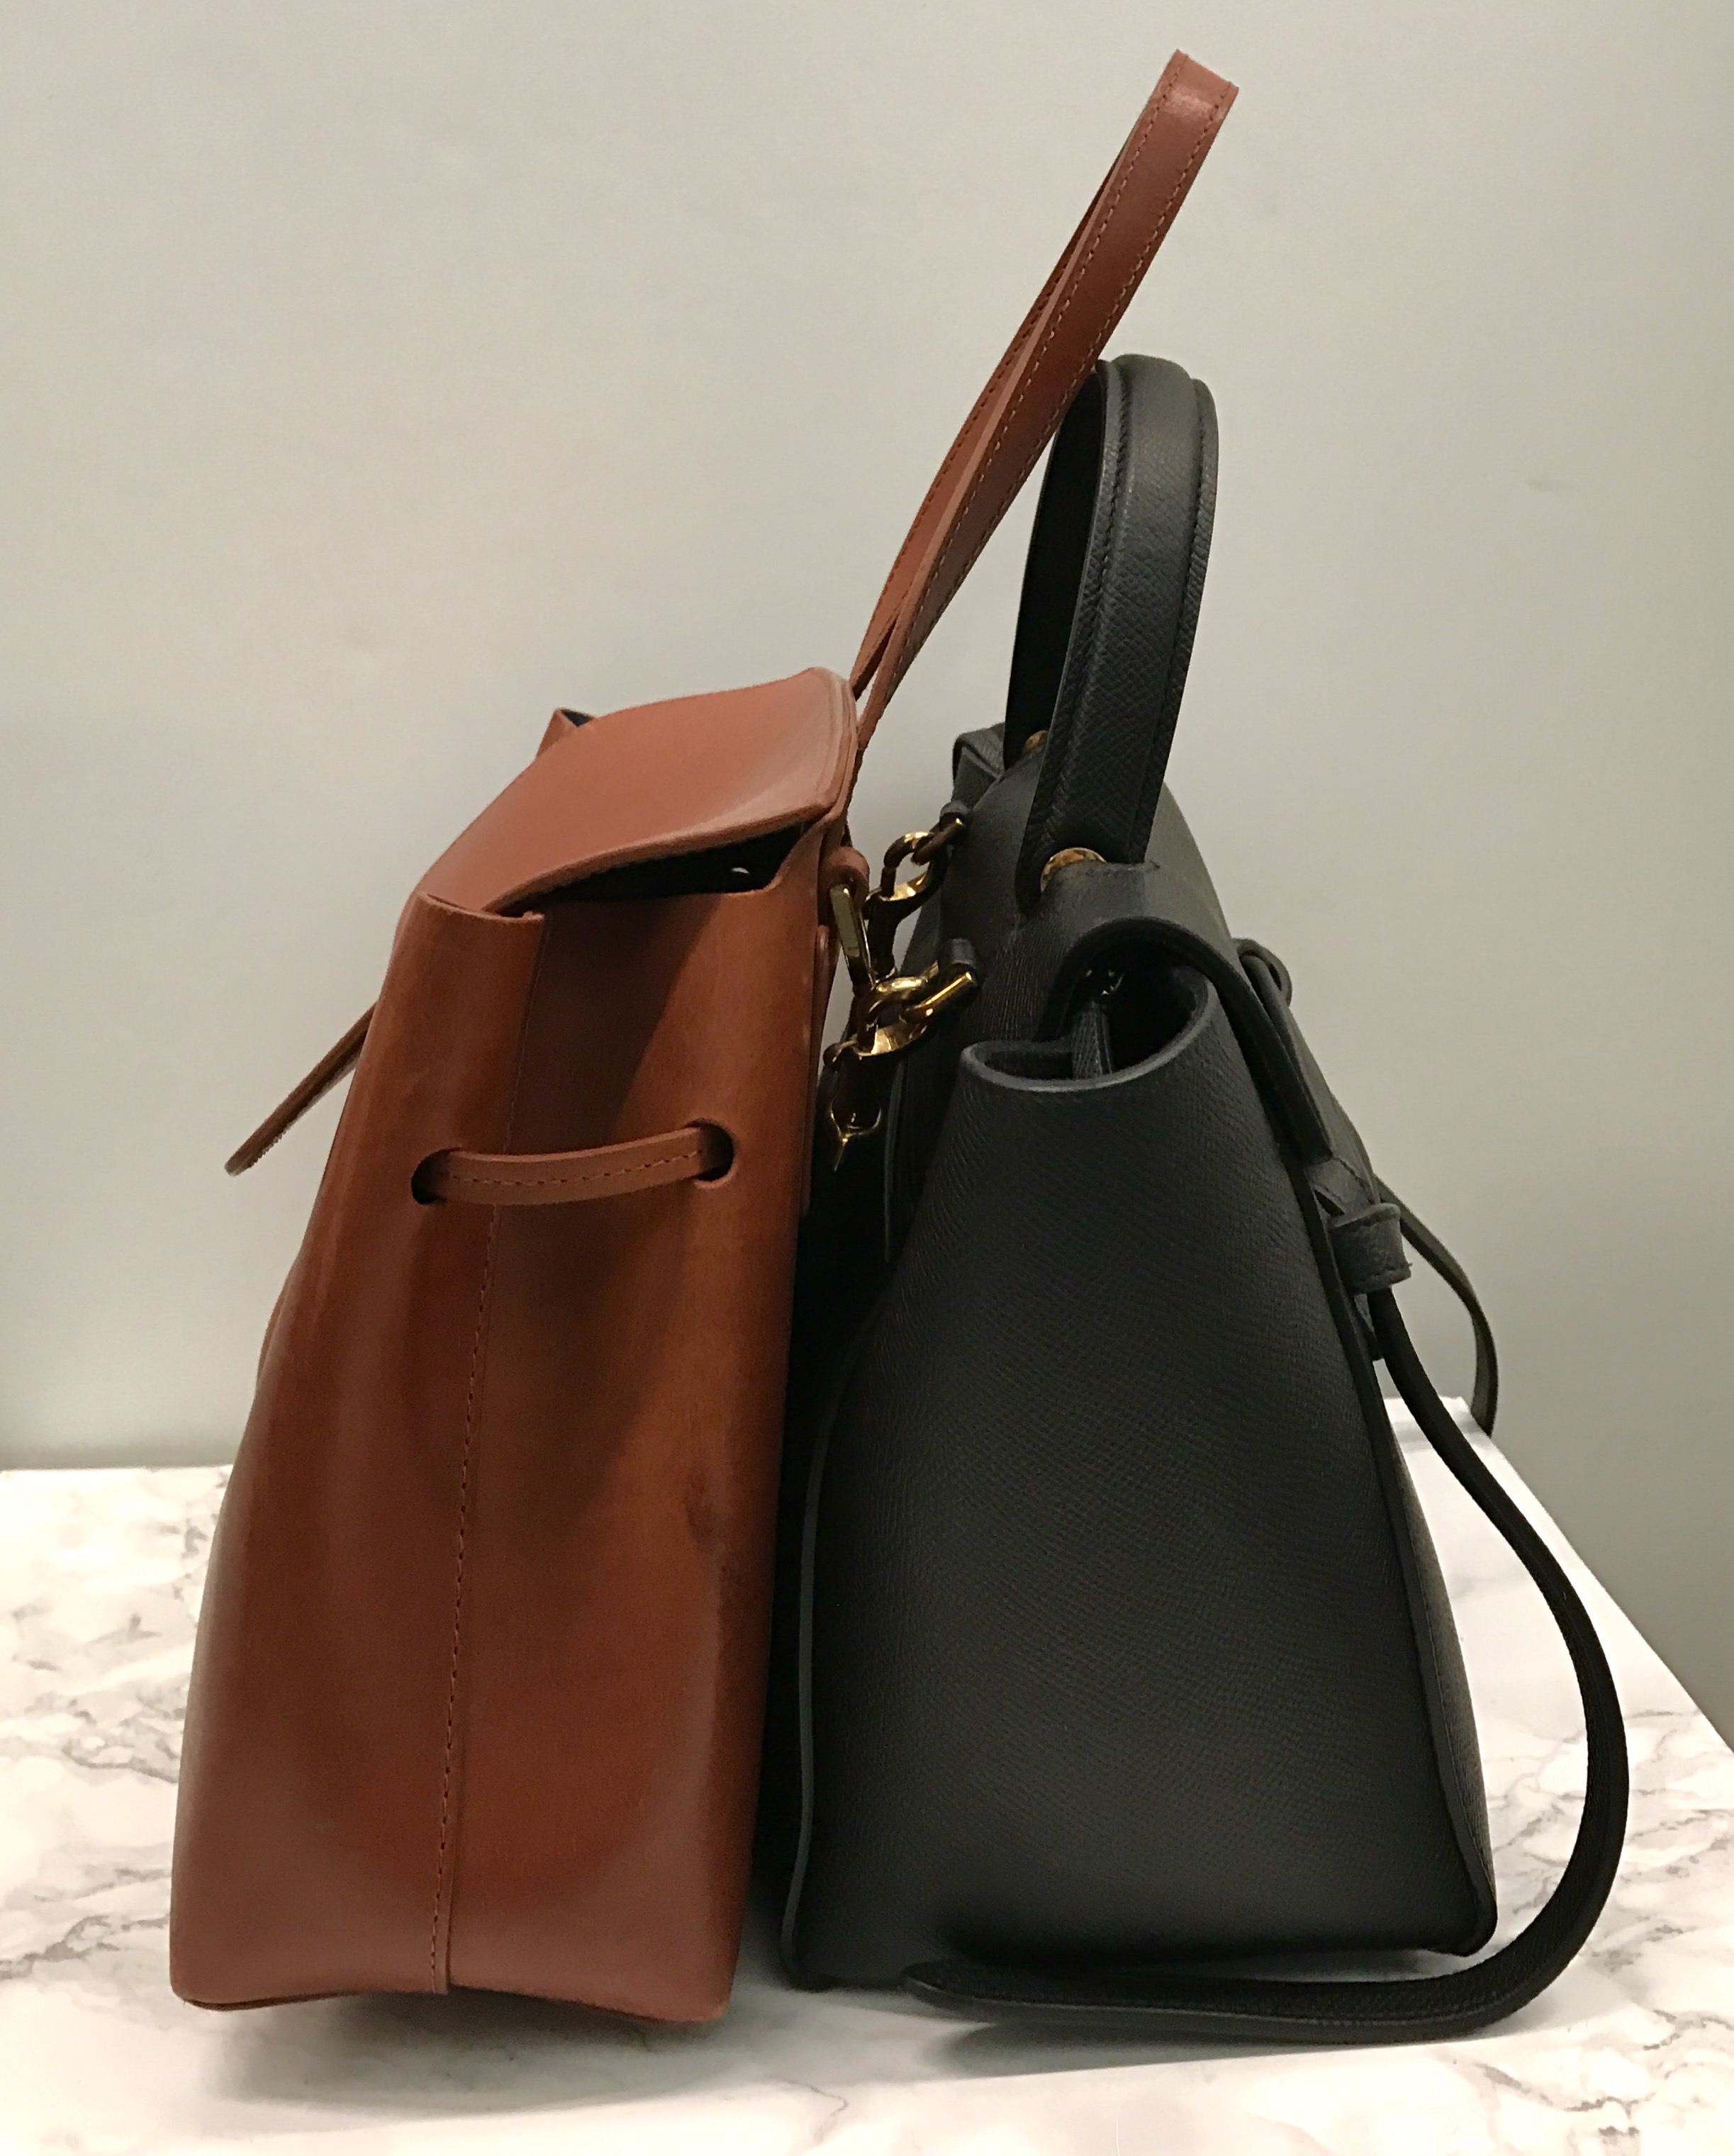 CELINE REVIEWS — A Blog About Appreciating Quality & The Value of